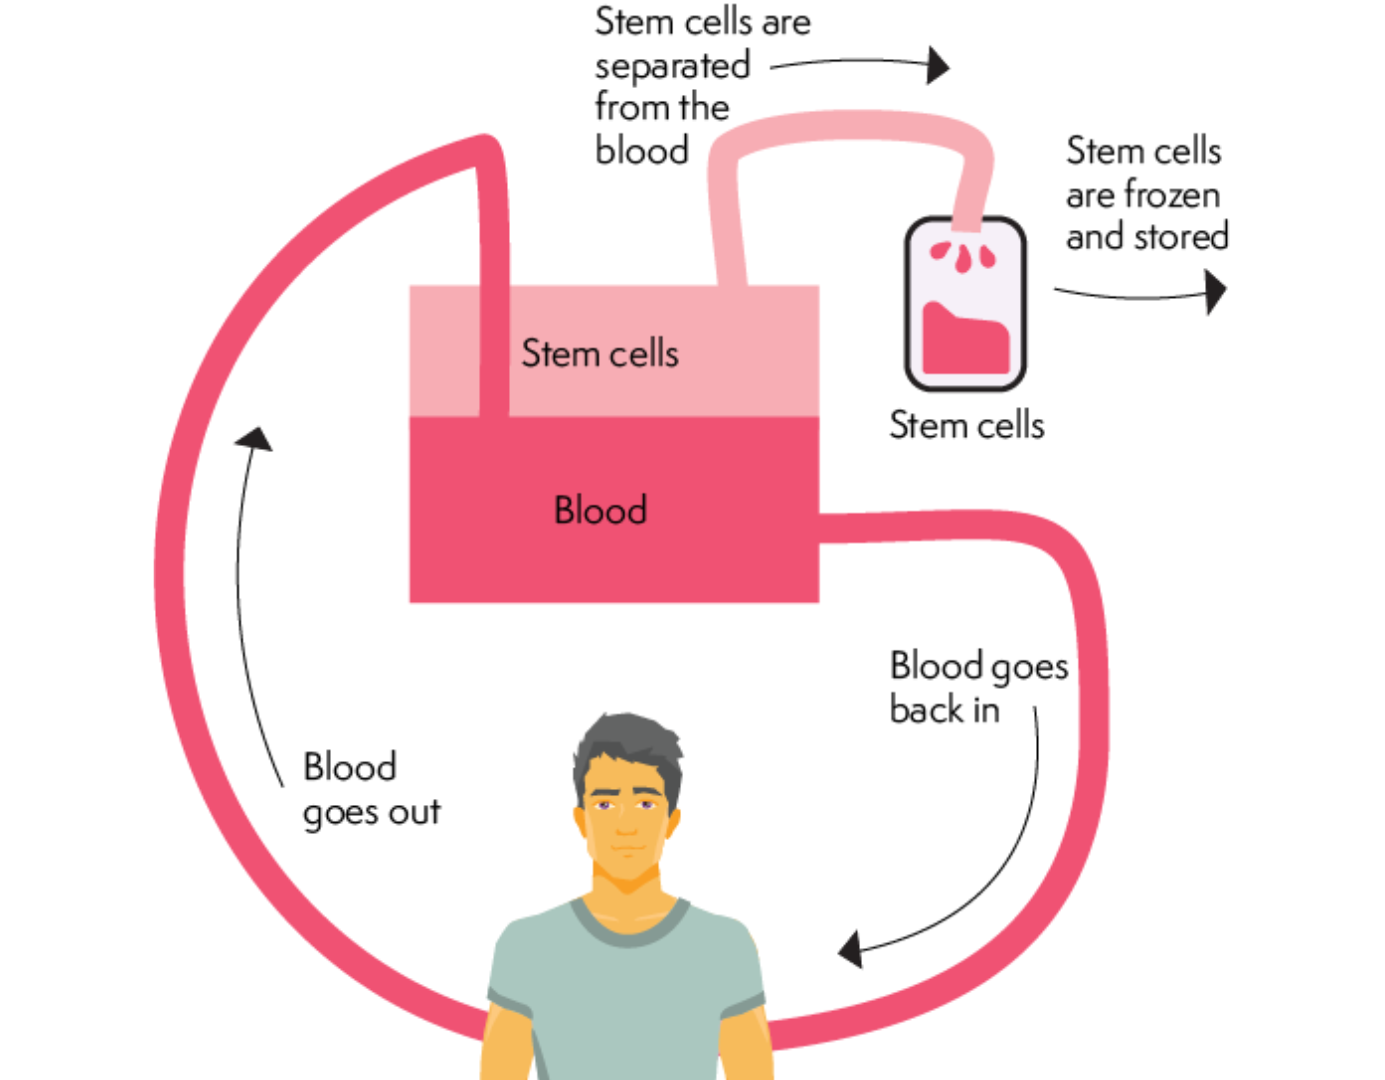 Illustrated cycle of a stem cell transplant. Shows blood going out of the body. Stem cells are separated from the  blood, frozen and stored. Blood goes back into the body.